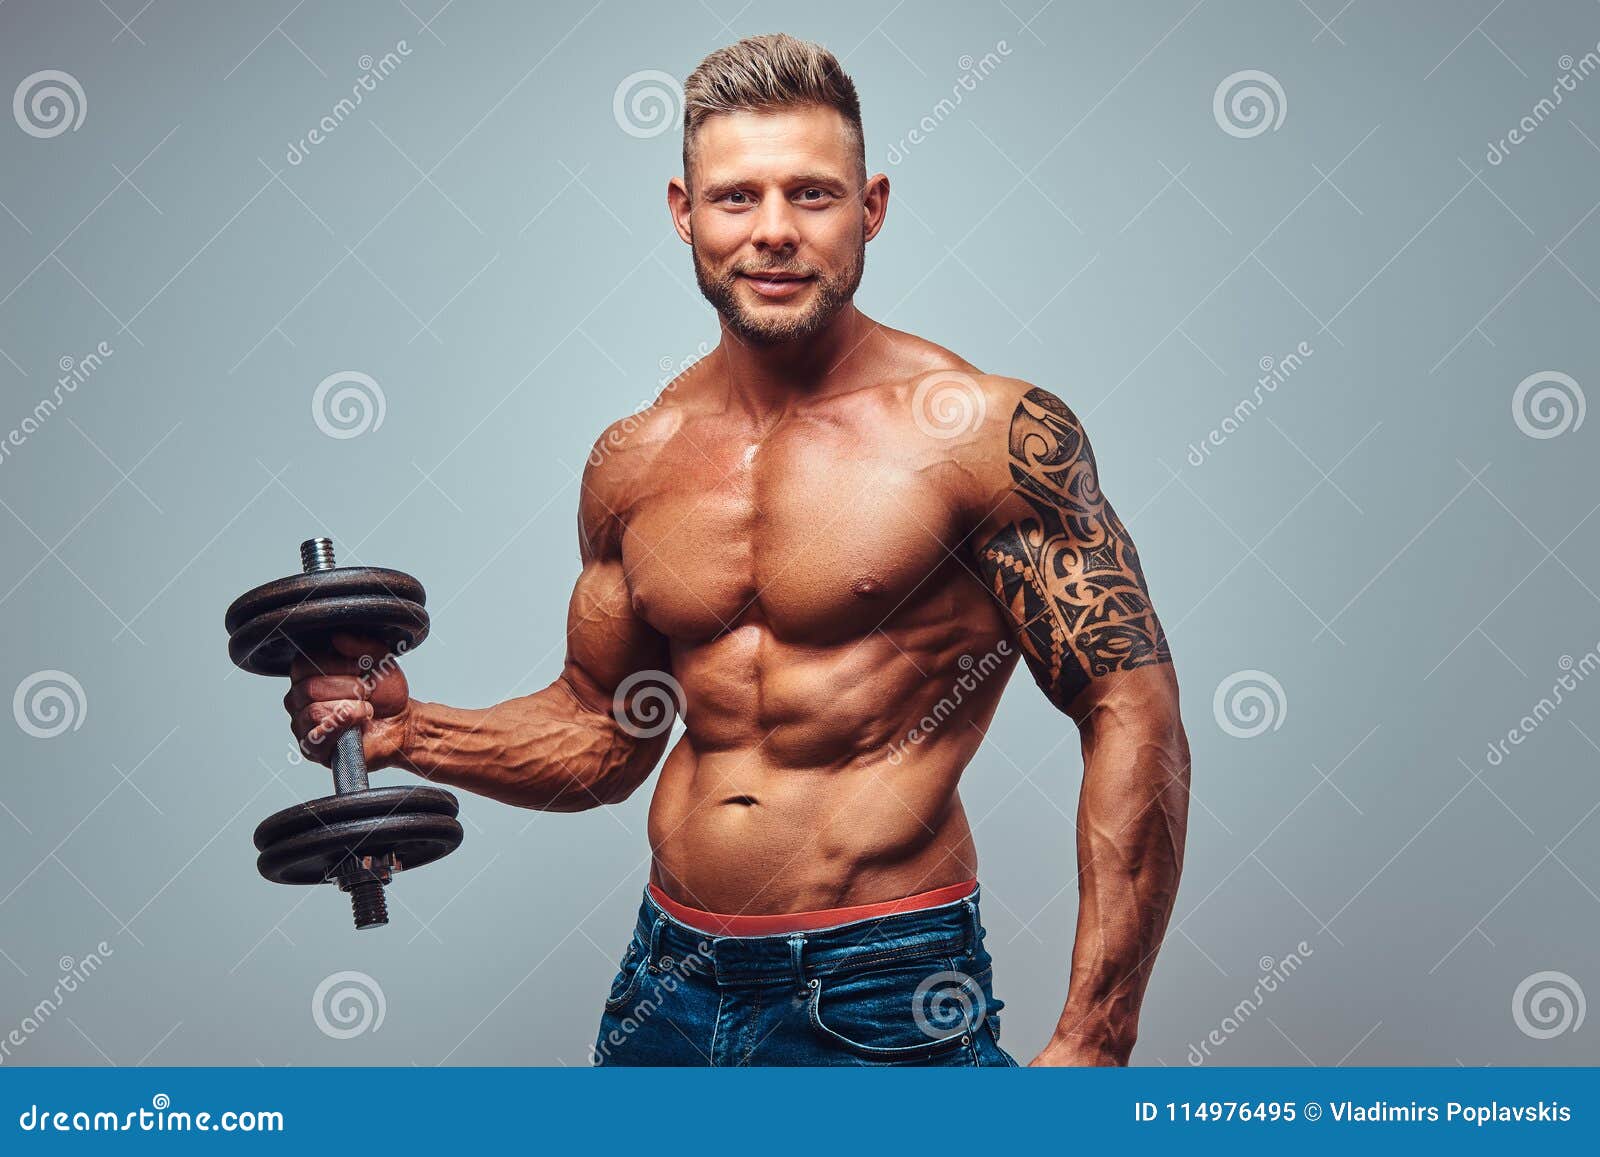 A Handsome Shirtless Tattooed Bodybuilder with Stylish Haircut and Beard,  Wearing Sports Shorts, Posing in a Studio Stock Image - Image of champion,  caucasian: 114976495